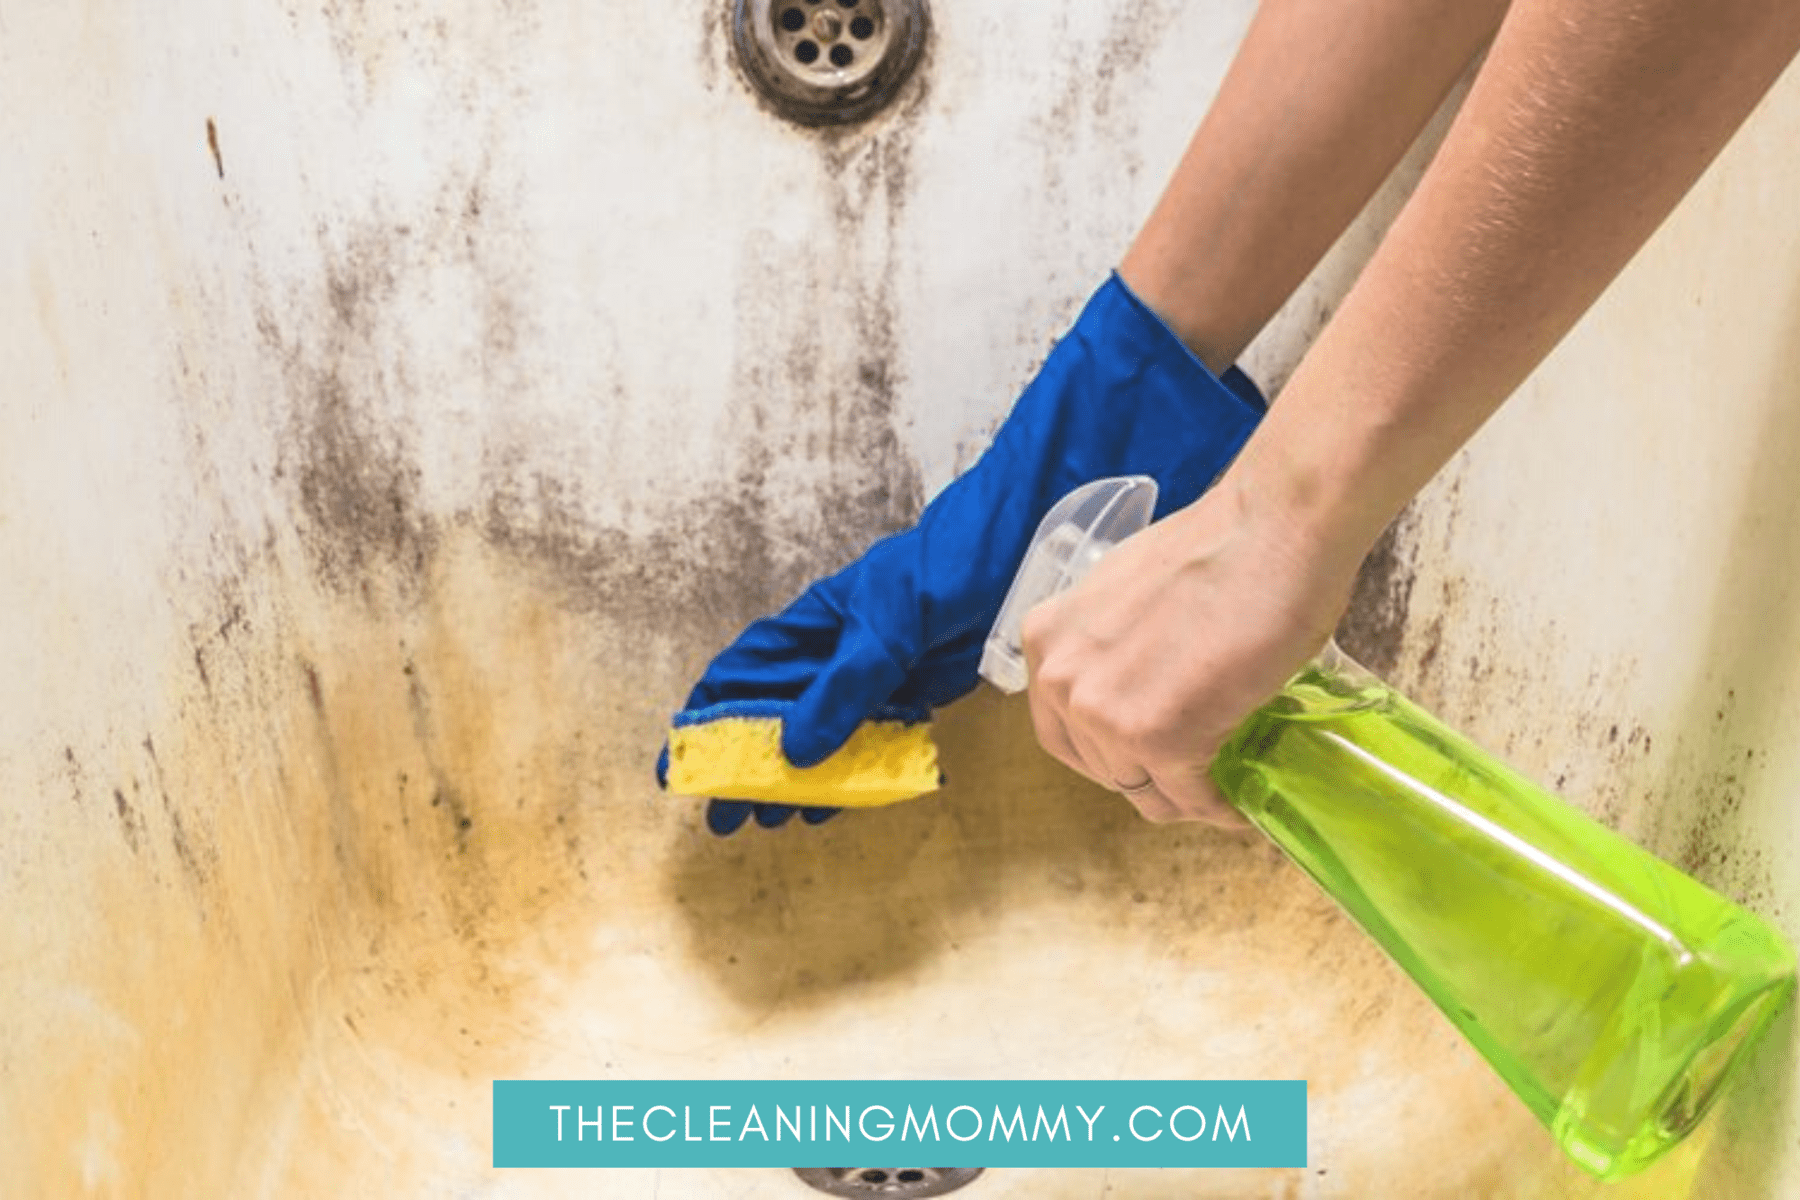 Cleaning a dirty bathtub with blue gloves and yellow sponge